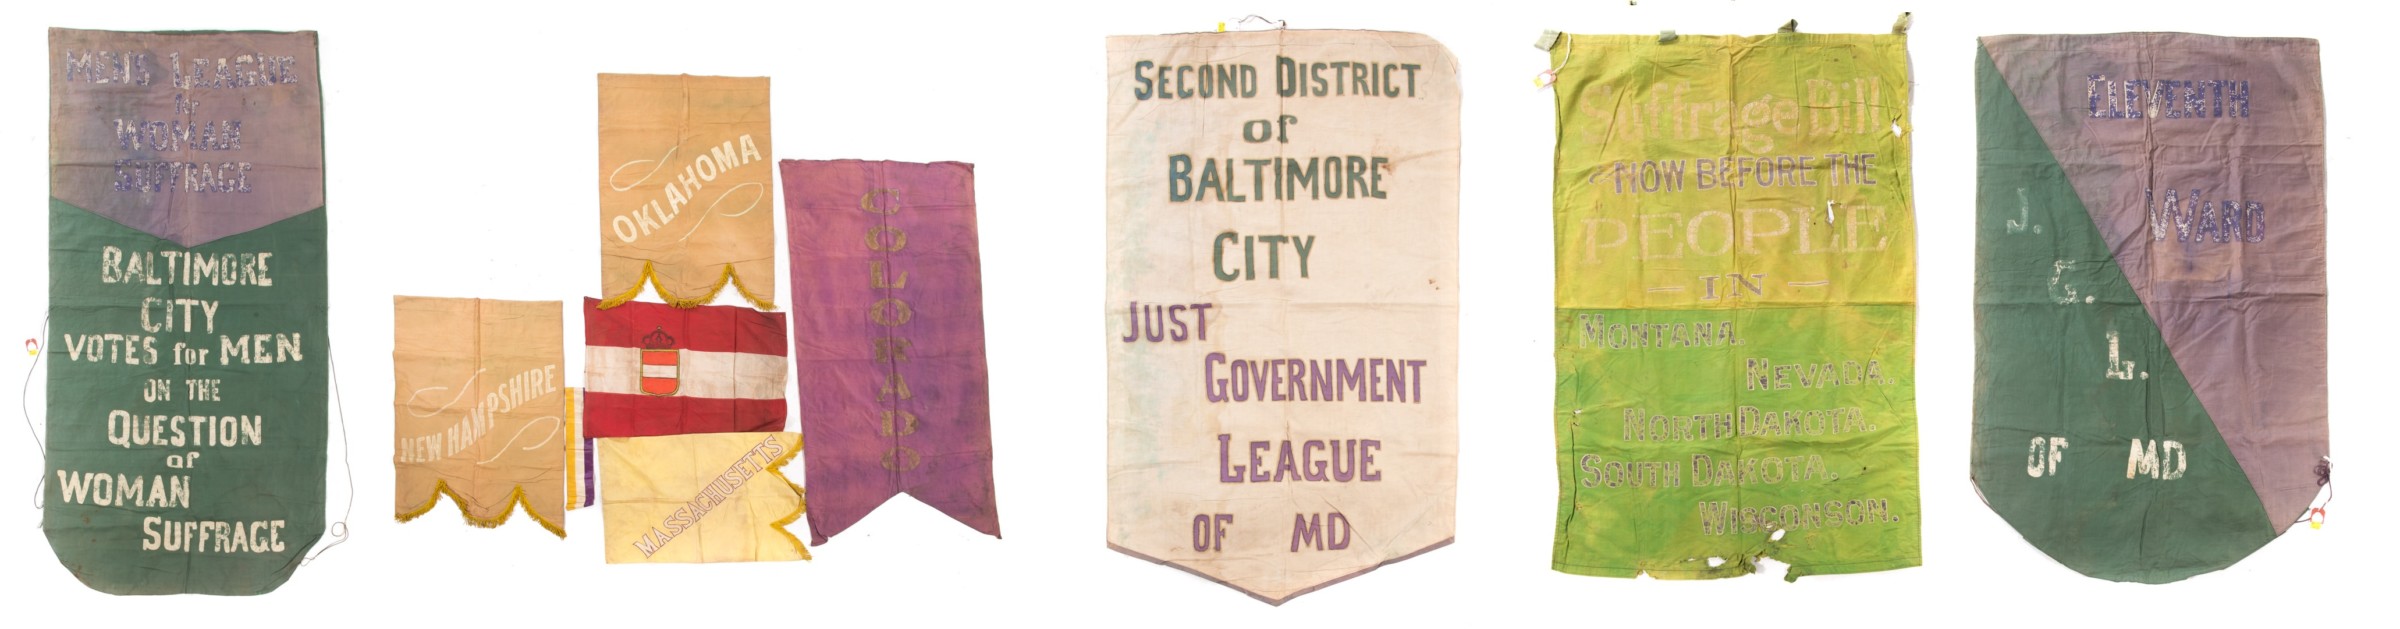 Suffrage Movement Banners & Clothing